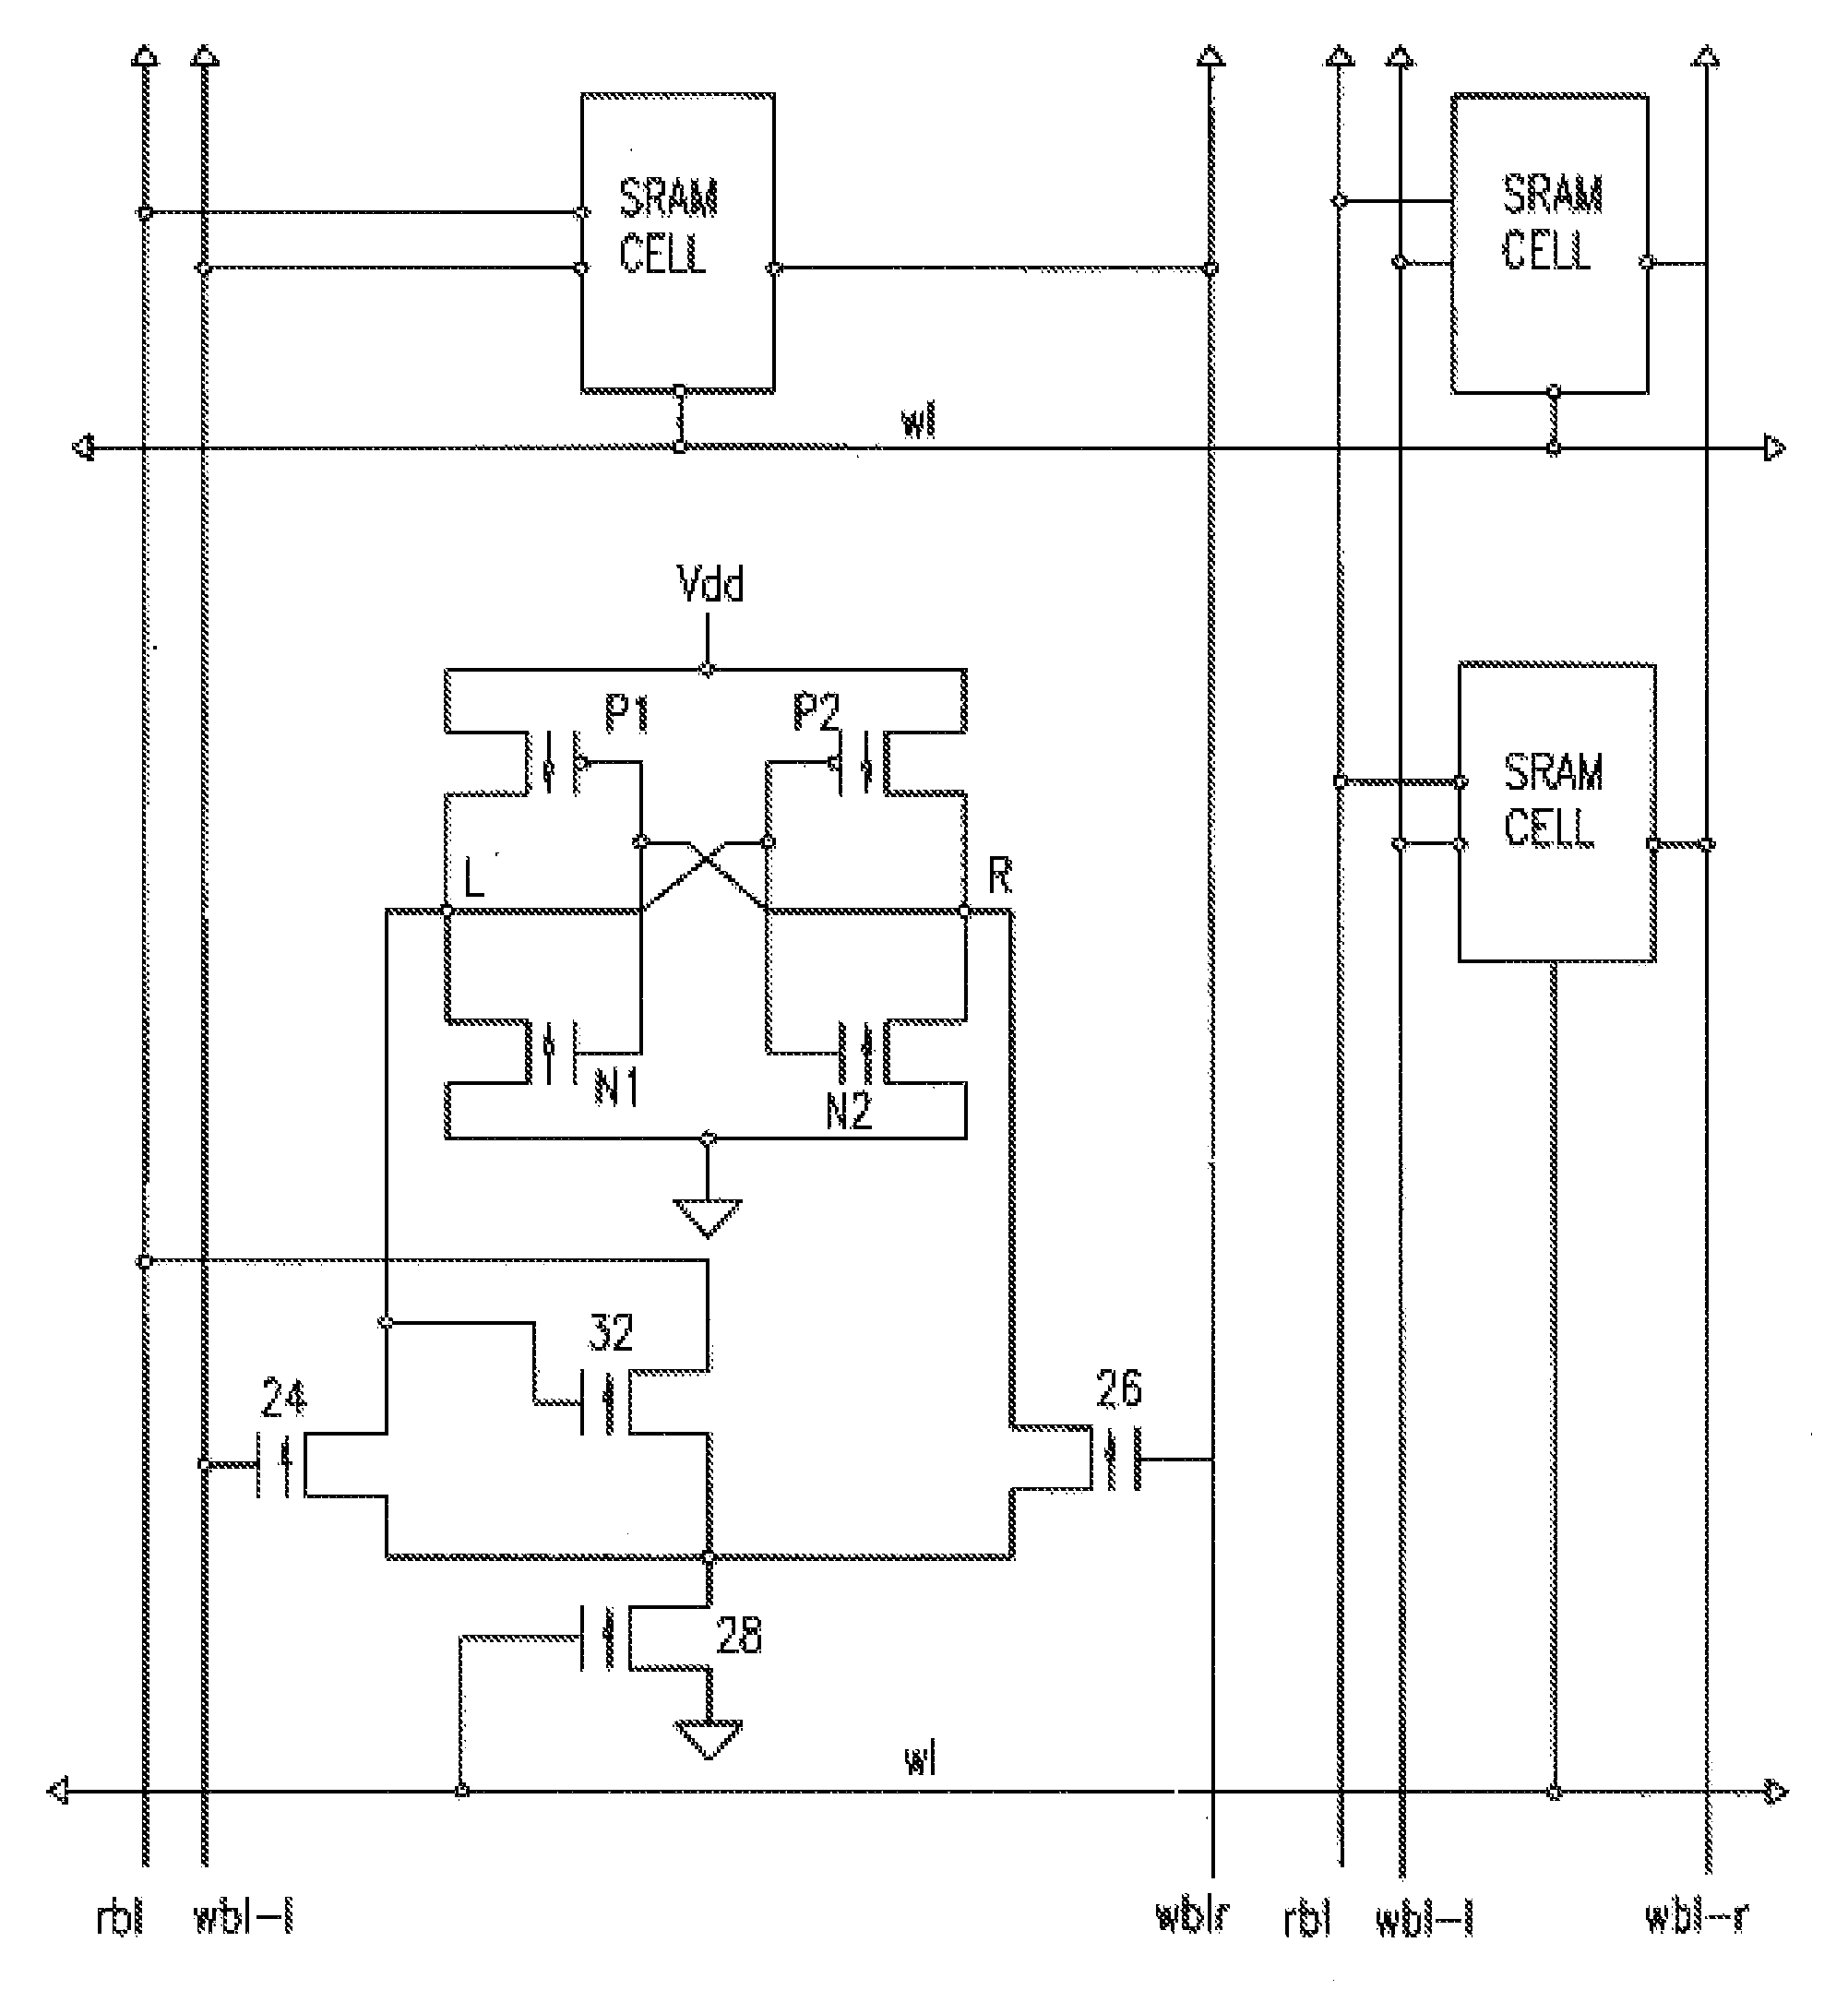 Eight Transistor SRAM Cell with Improved Stability Requiring Only One Word Line